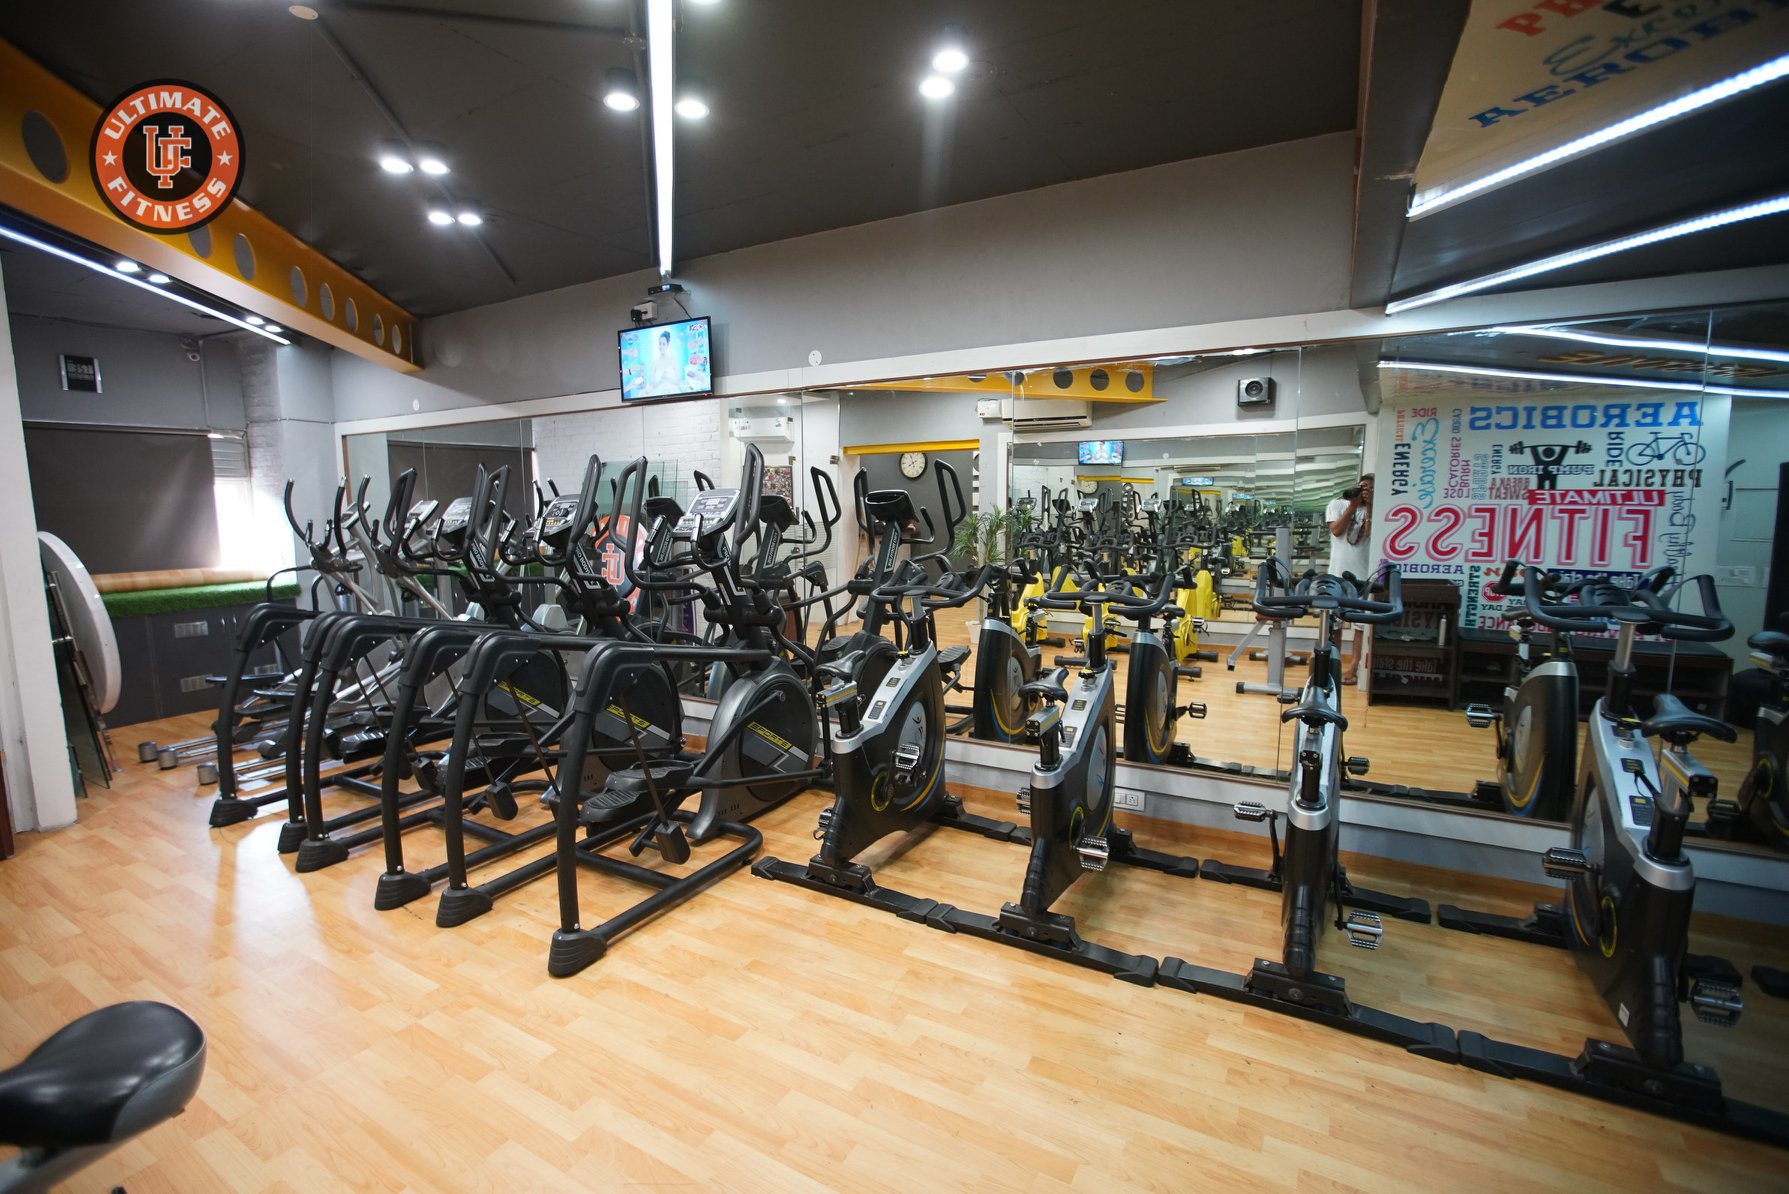 chandigarh-sector-47-Ultimate-Fitness-Gym_1148_MTE0OA_OTUzNQ